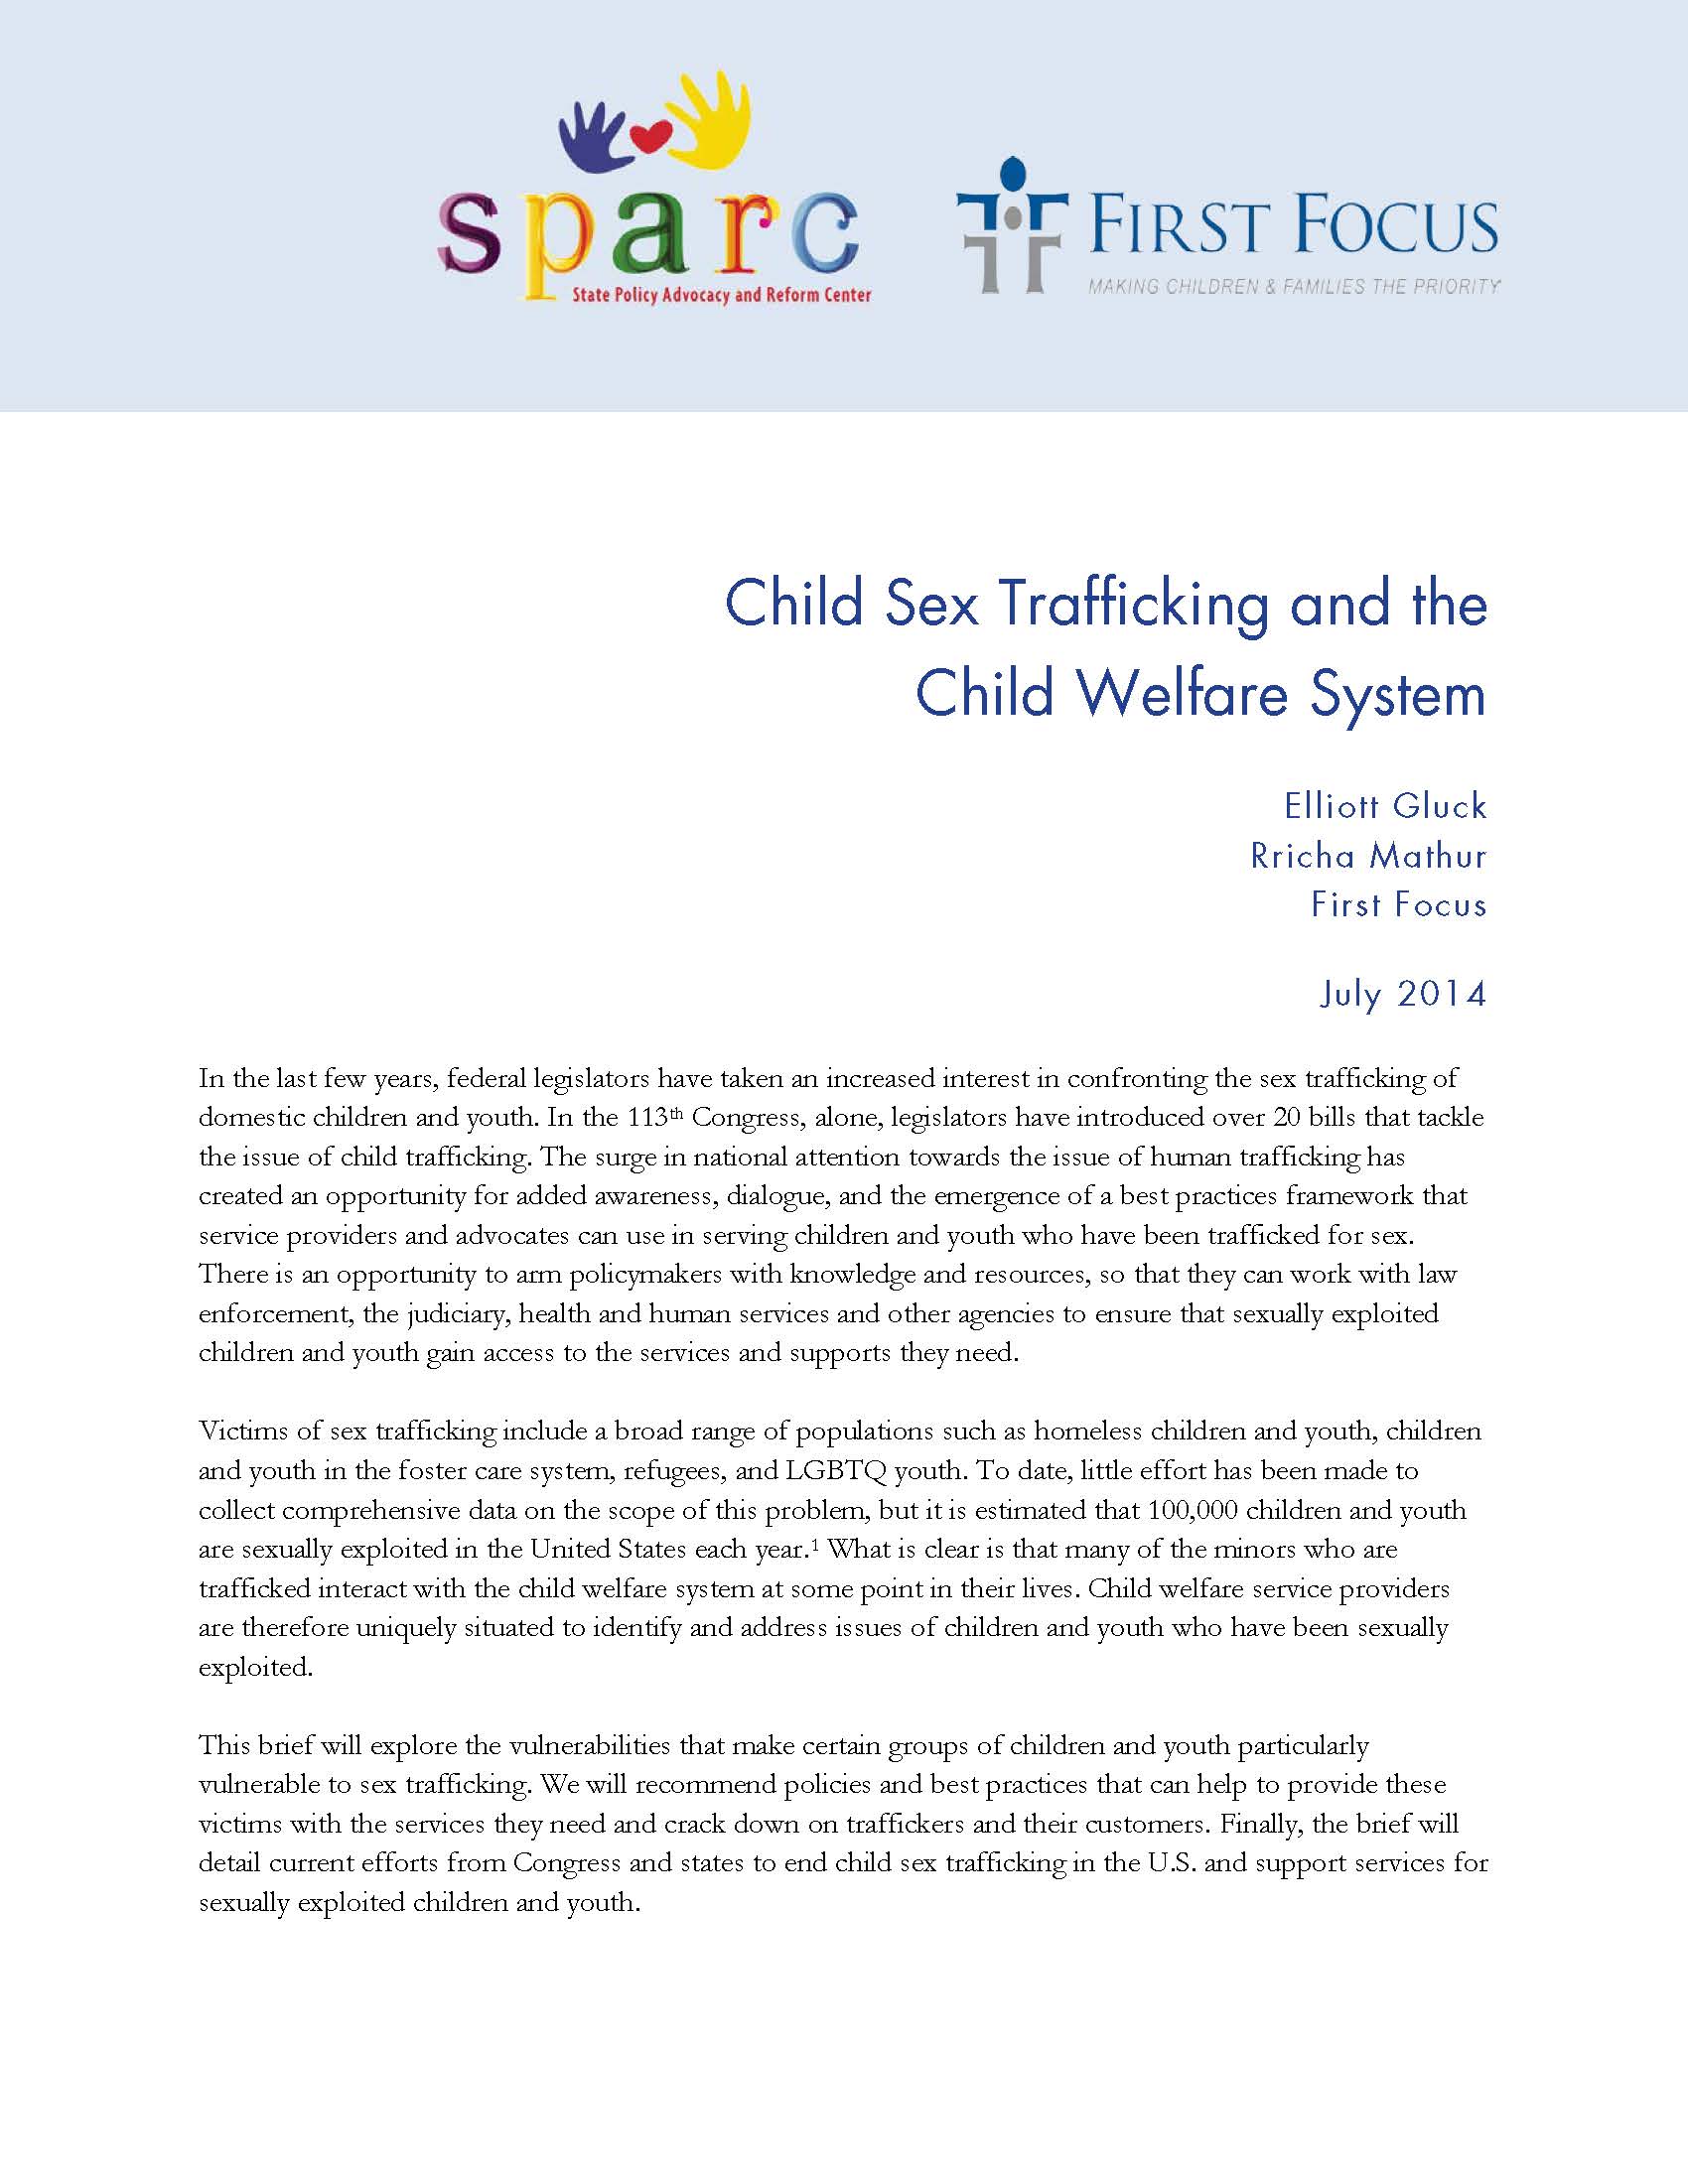 Sex Trafficking and the Child Welfare System